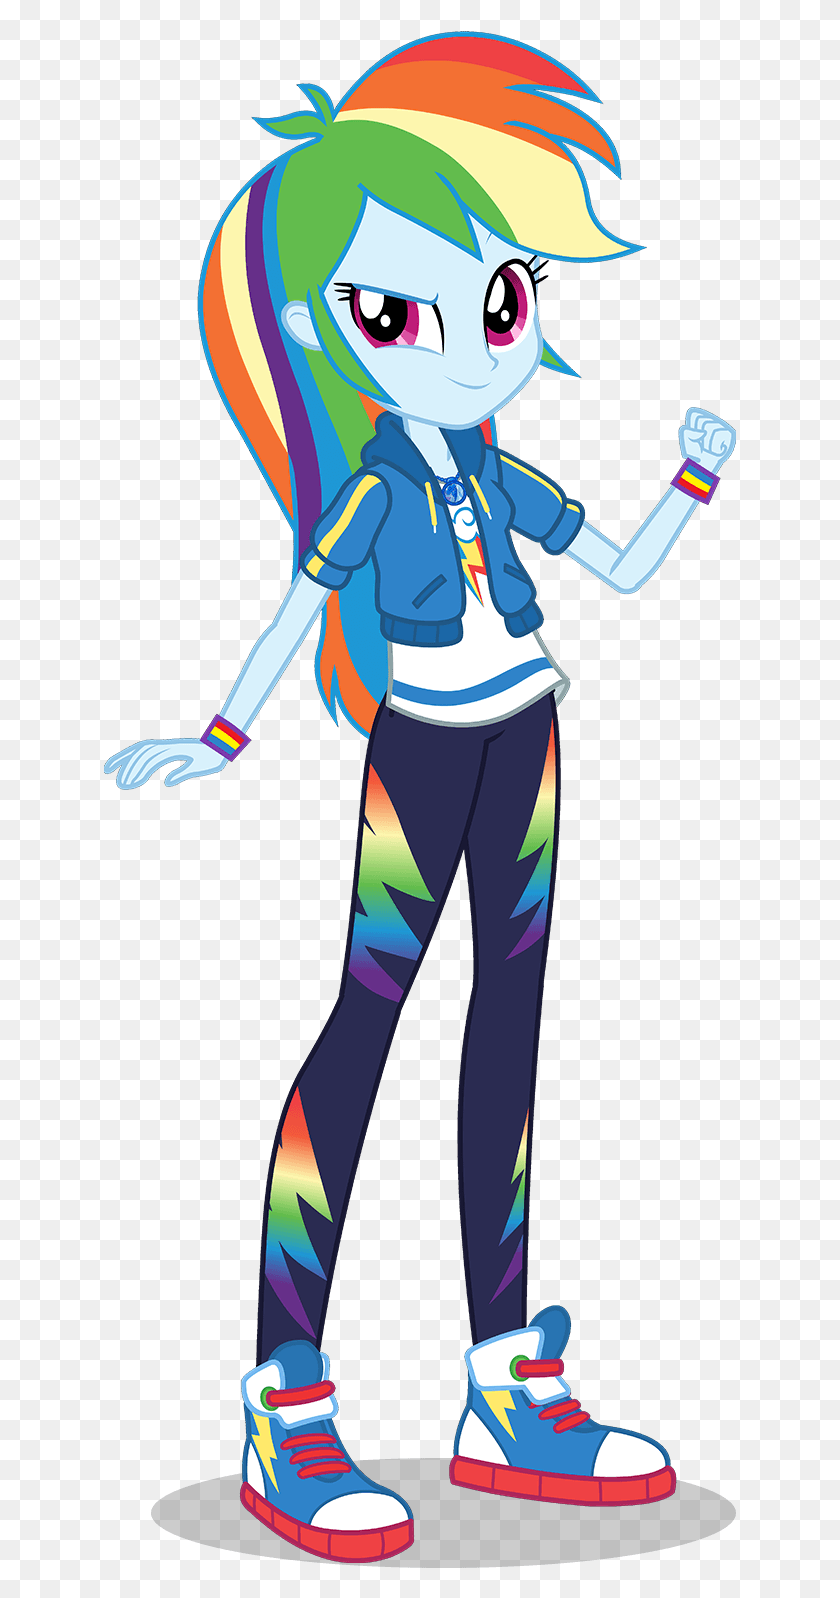 633x1538 Descargar Png My Little Pony Applejack And Rainbow Dash, Persona, Zapato Hd Png